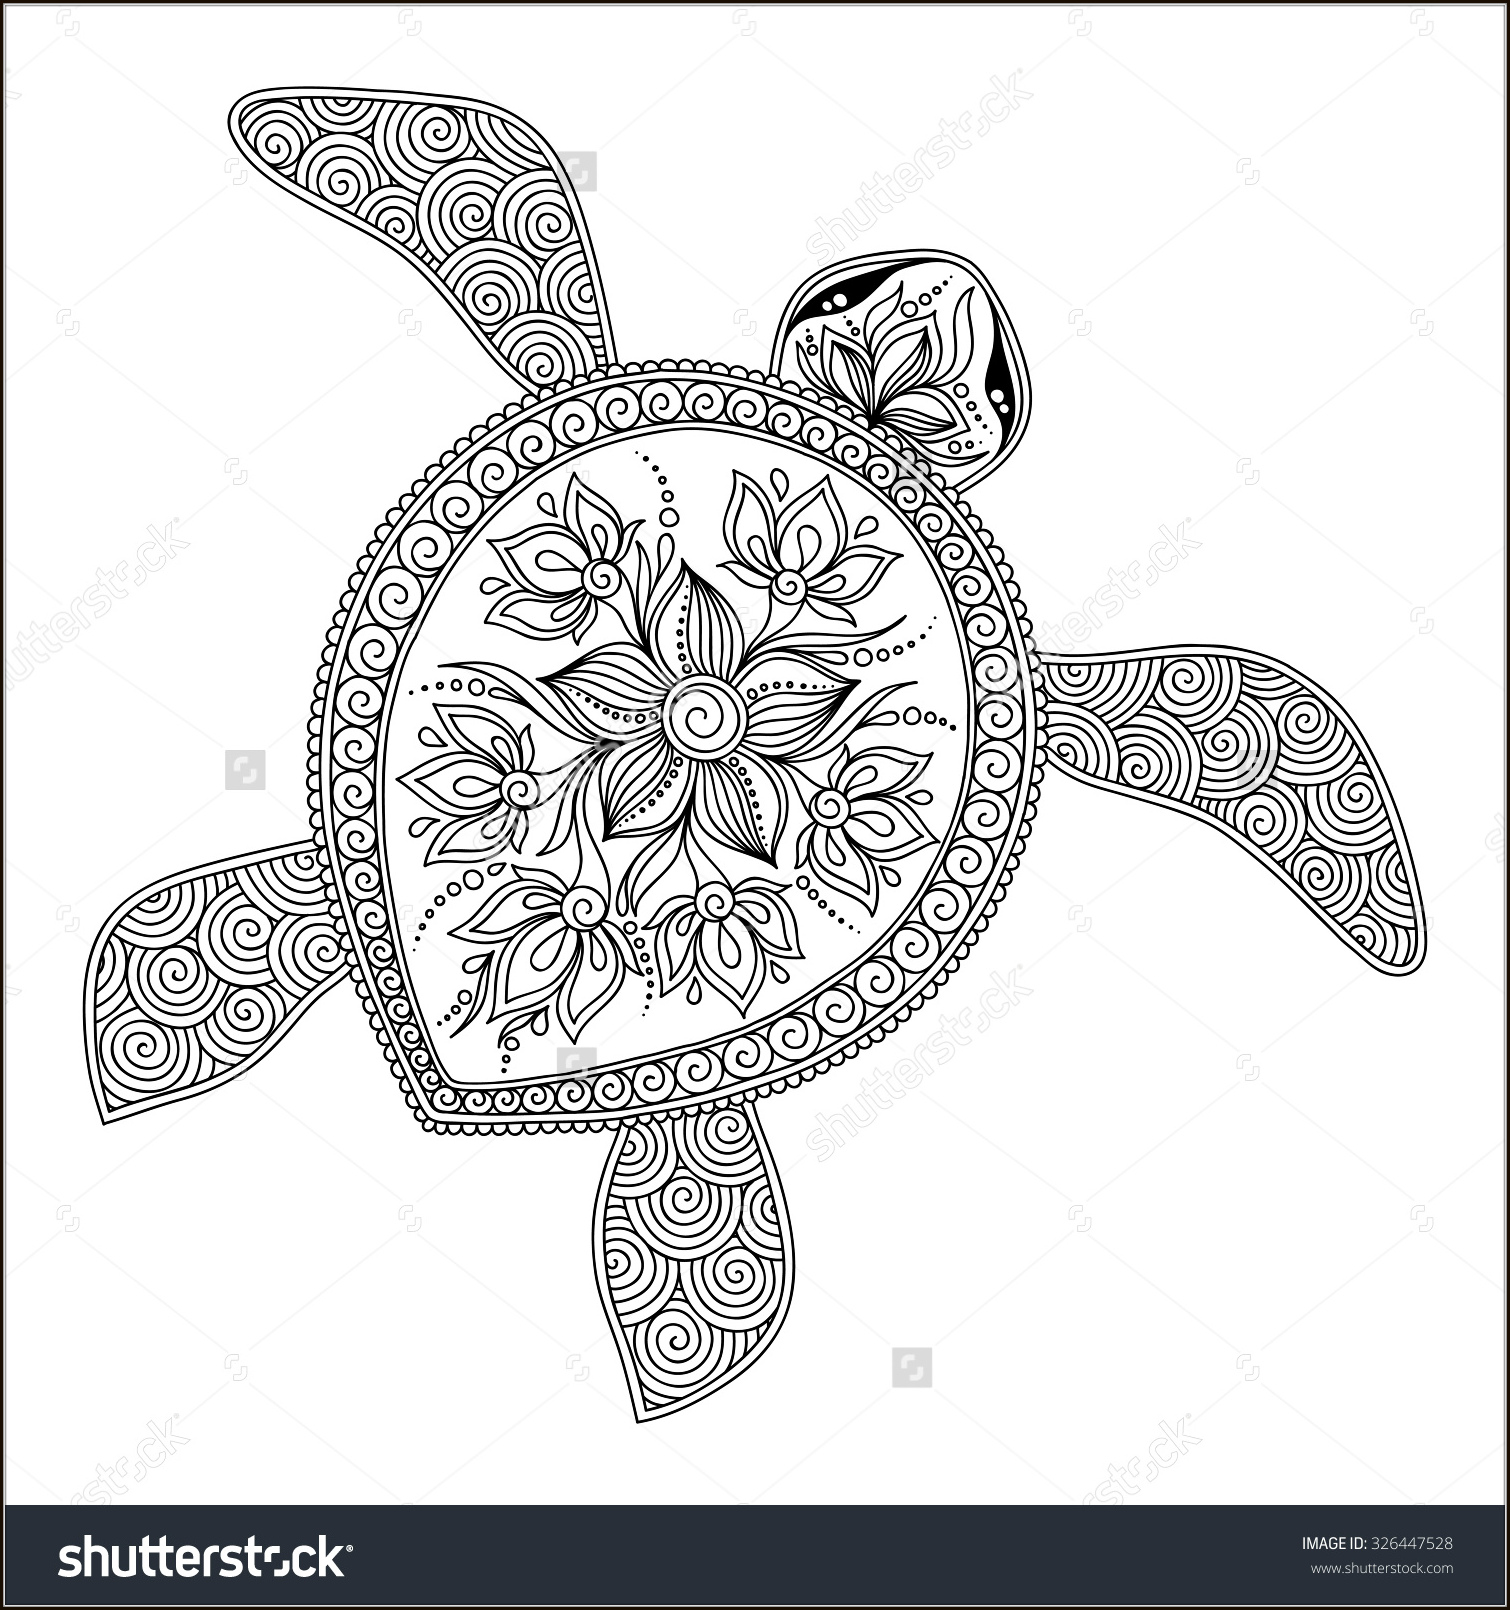 Coloring for adults, Coloring Antistress, тварини, travel, sophisticated coloring antistress,  животные, turtle,animals